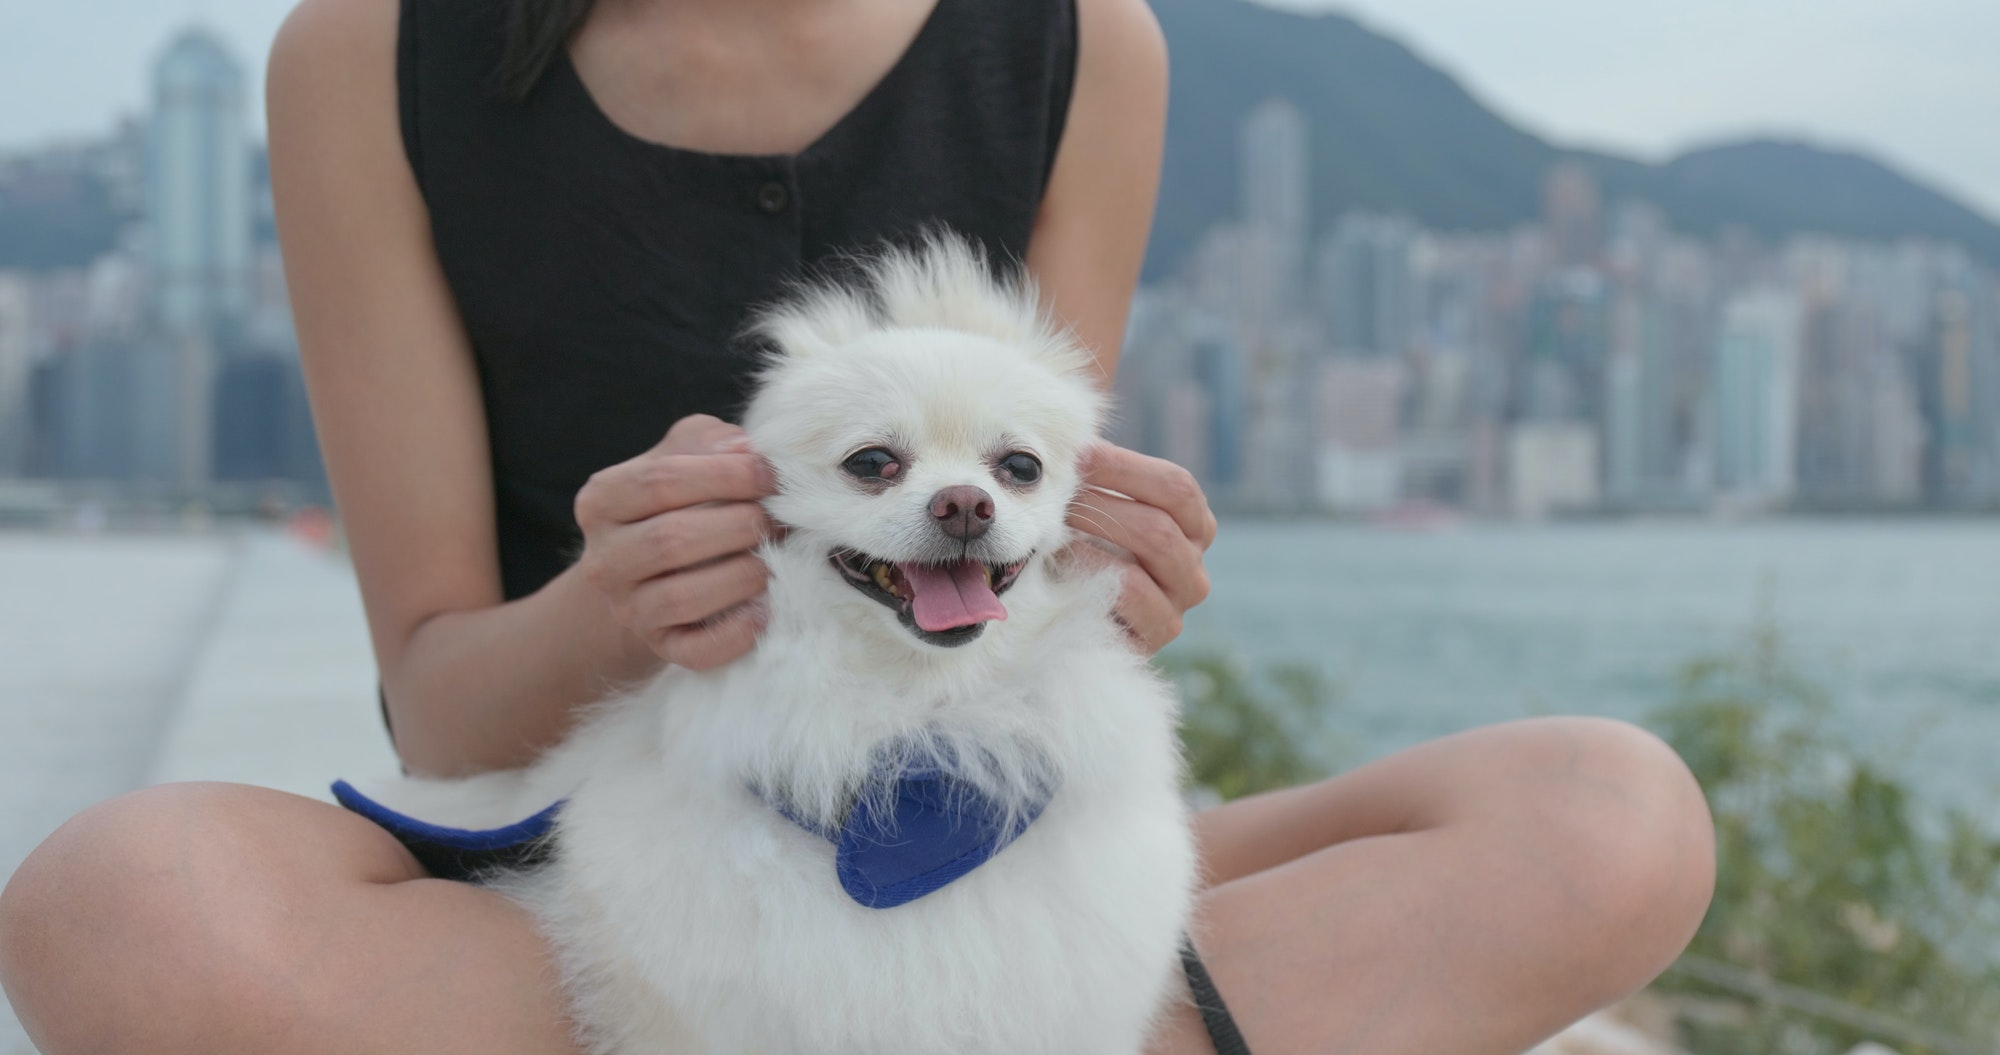 Cute Pomeranian dog with pet owner